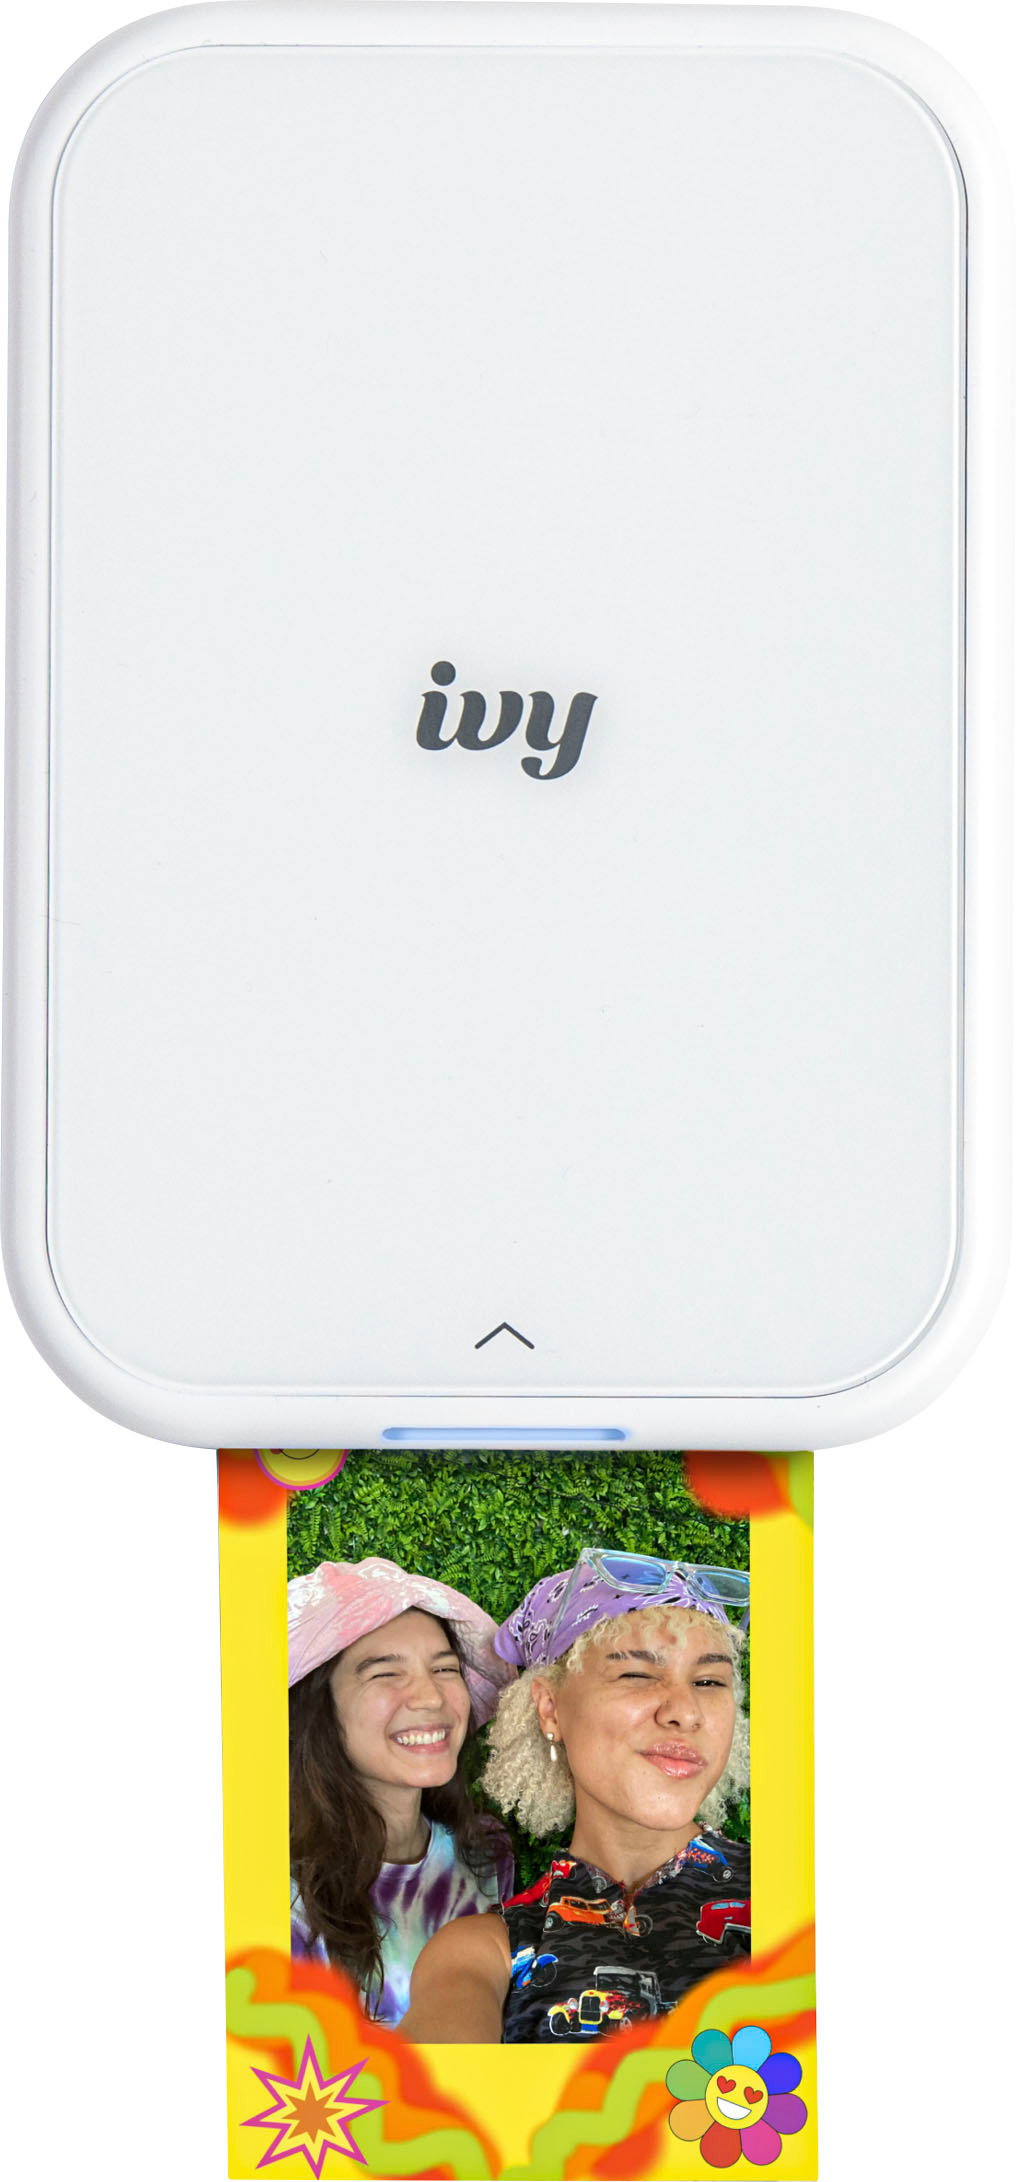 Canon IVY 2 Mini Photo Printer, Print from Compatible iOS & Android  Devices, Sticky-Back Prints, Pure White + Canon ZINK™ Sticky Back Photo  Paper Pack